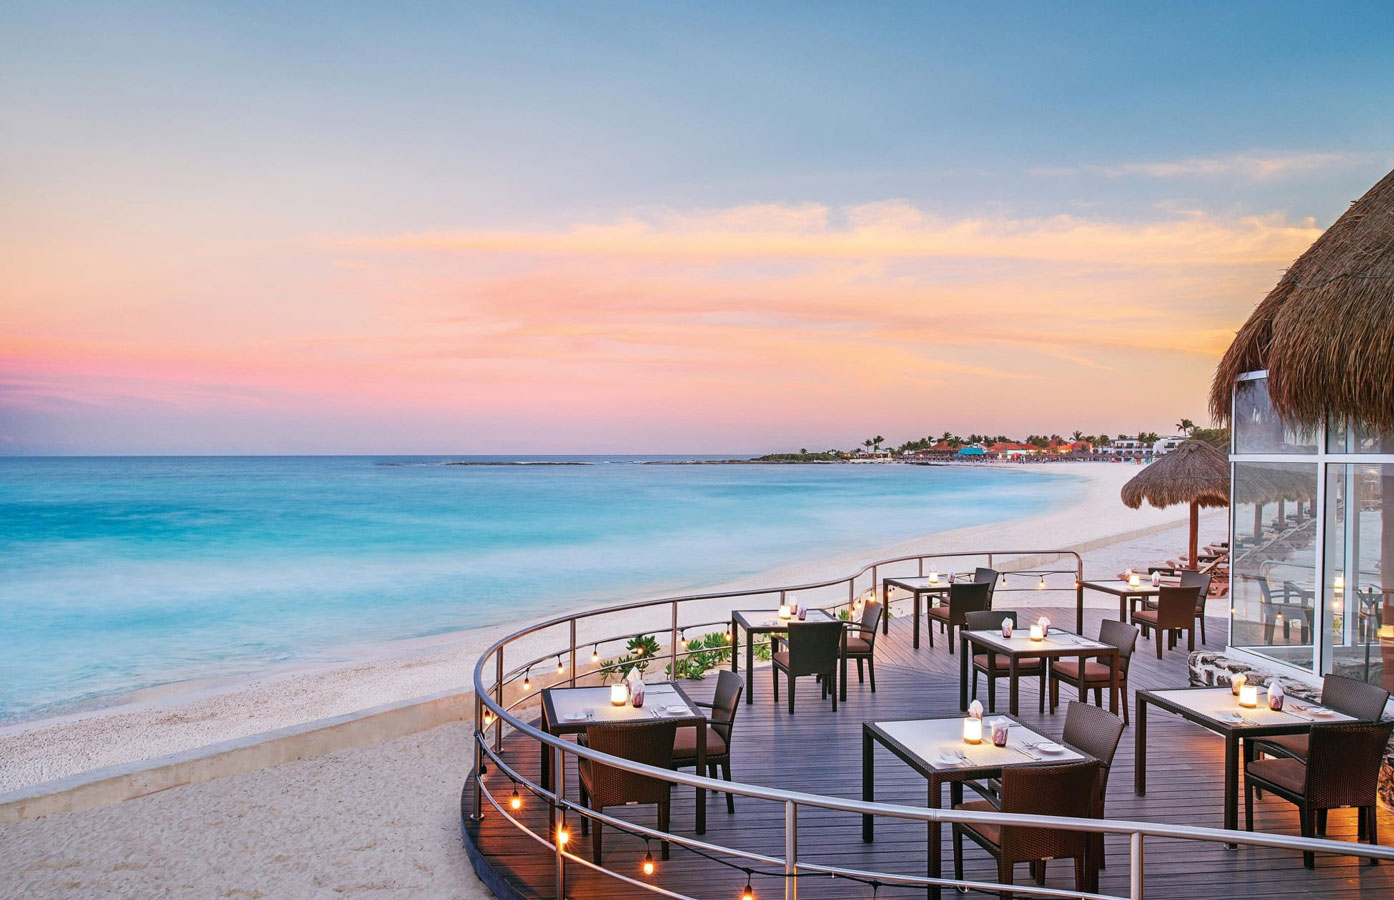 Hotel Project of The Westin Resort & Spa Cancun - Mexico with Artie Garden Outdoor Furniture